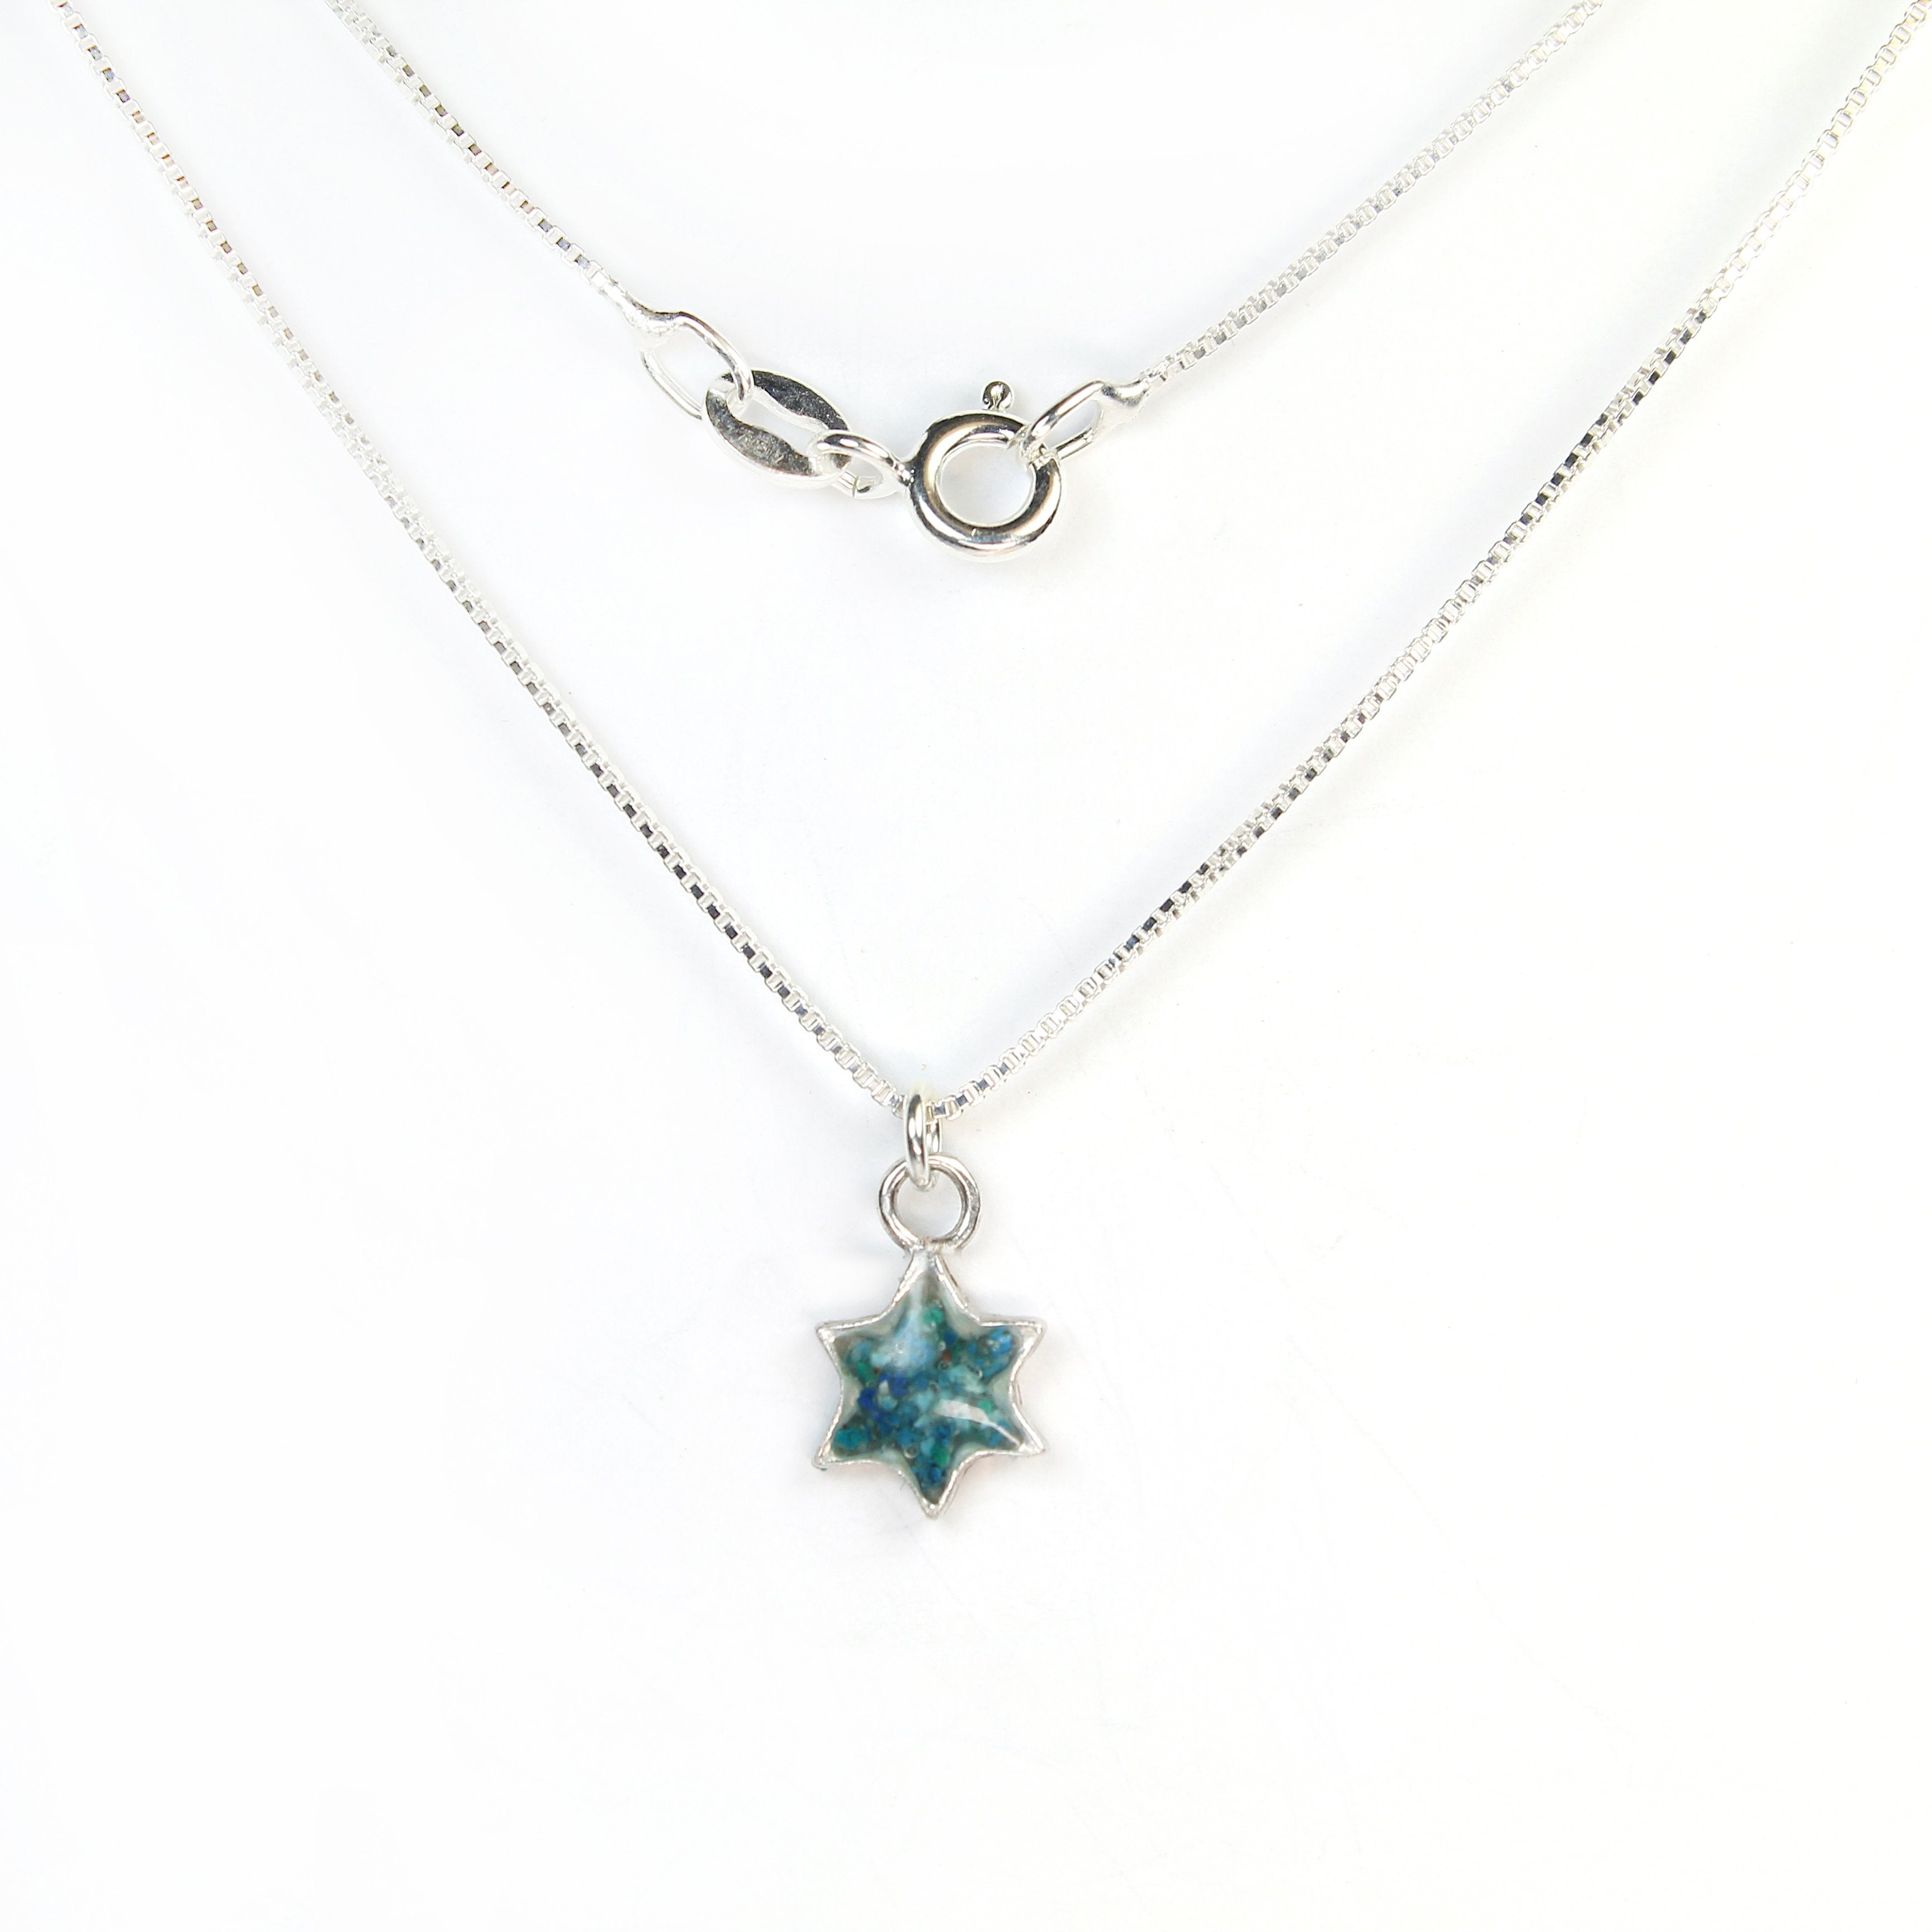 Small Blue Star of David Necklace with stones - Shulamit Kanter